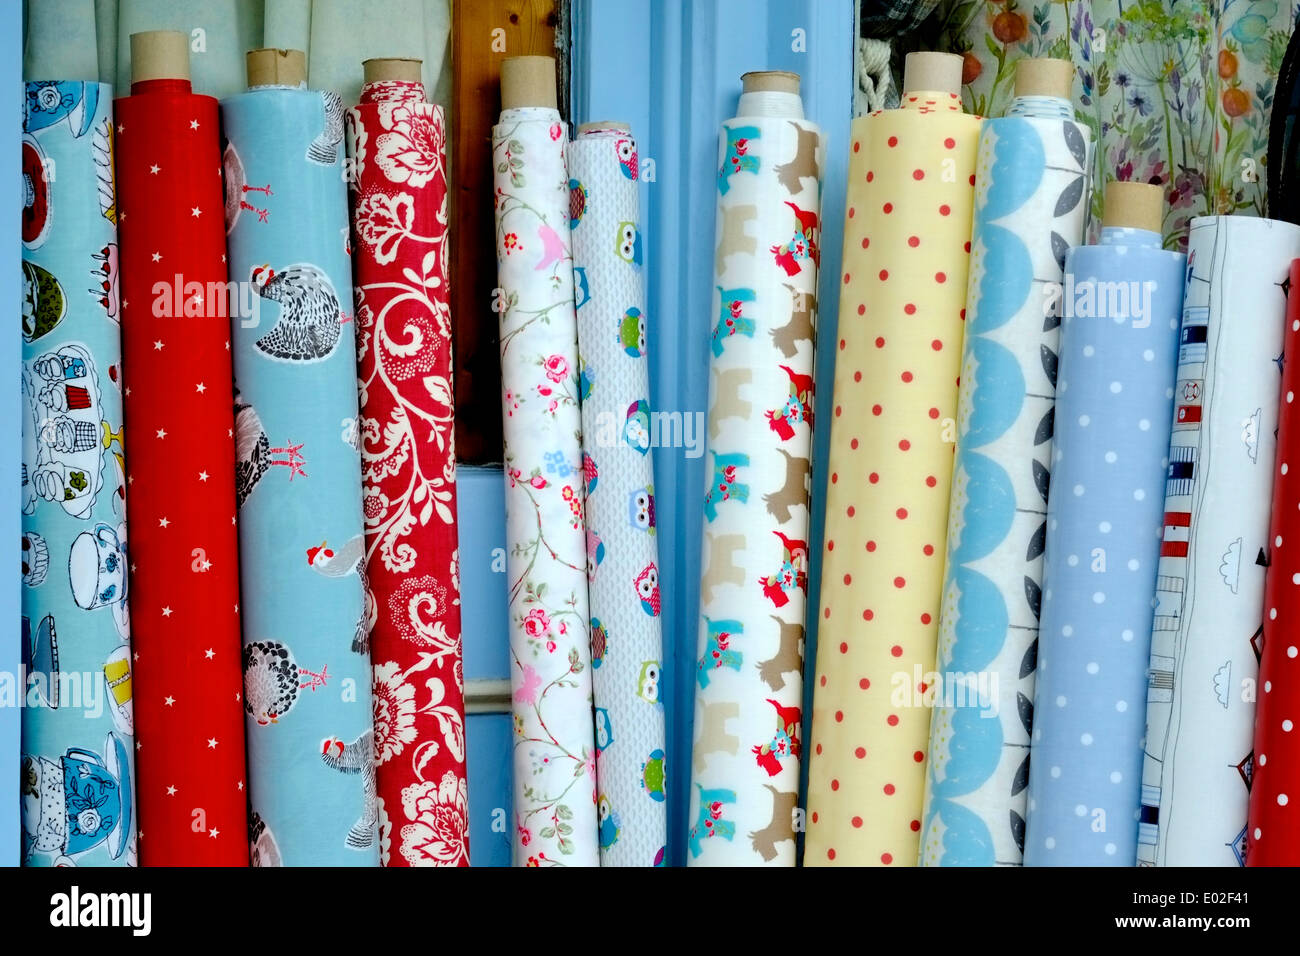 Rolls Fabric Material High Resolution Stock Photography and Images - Alamy